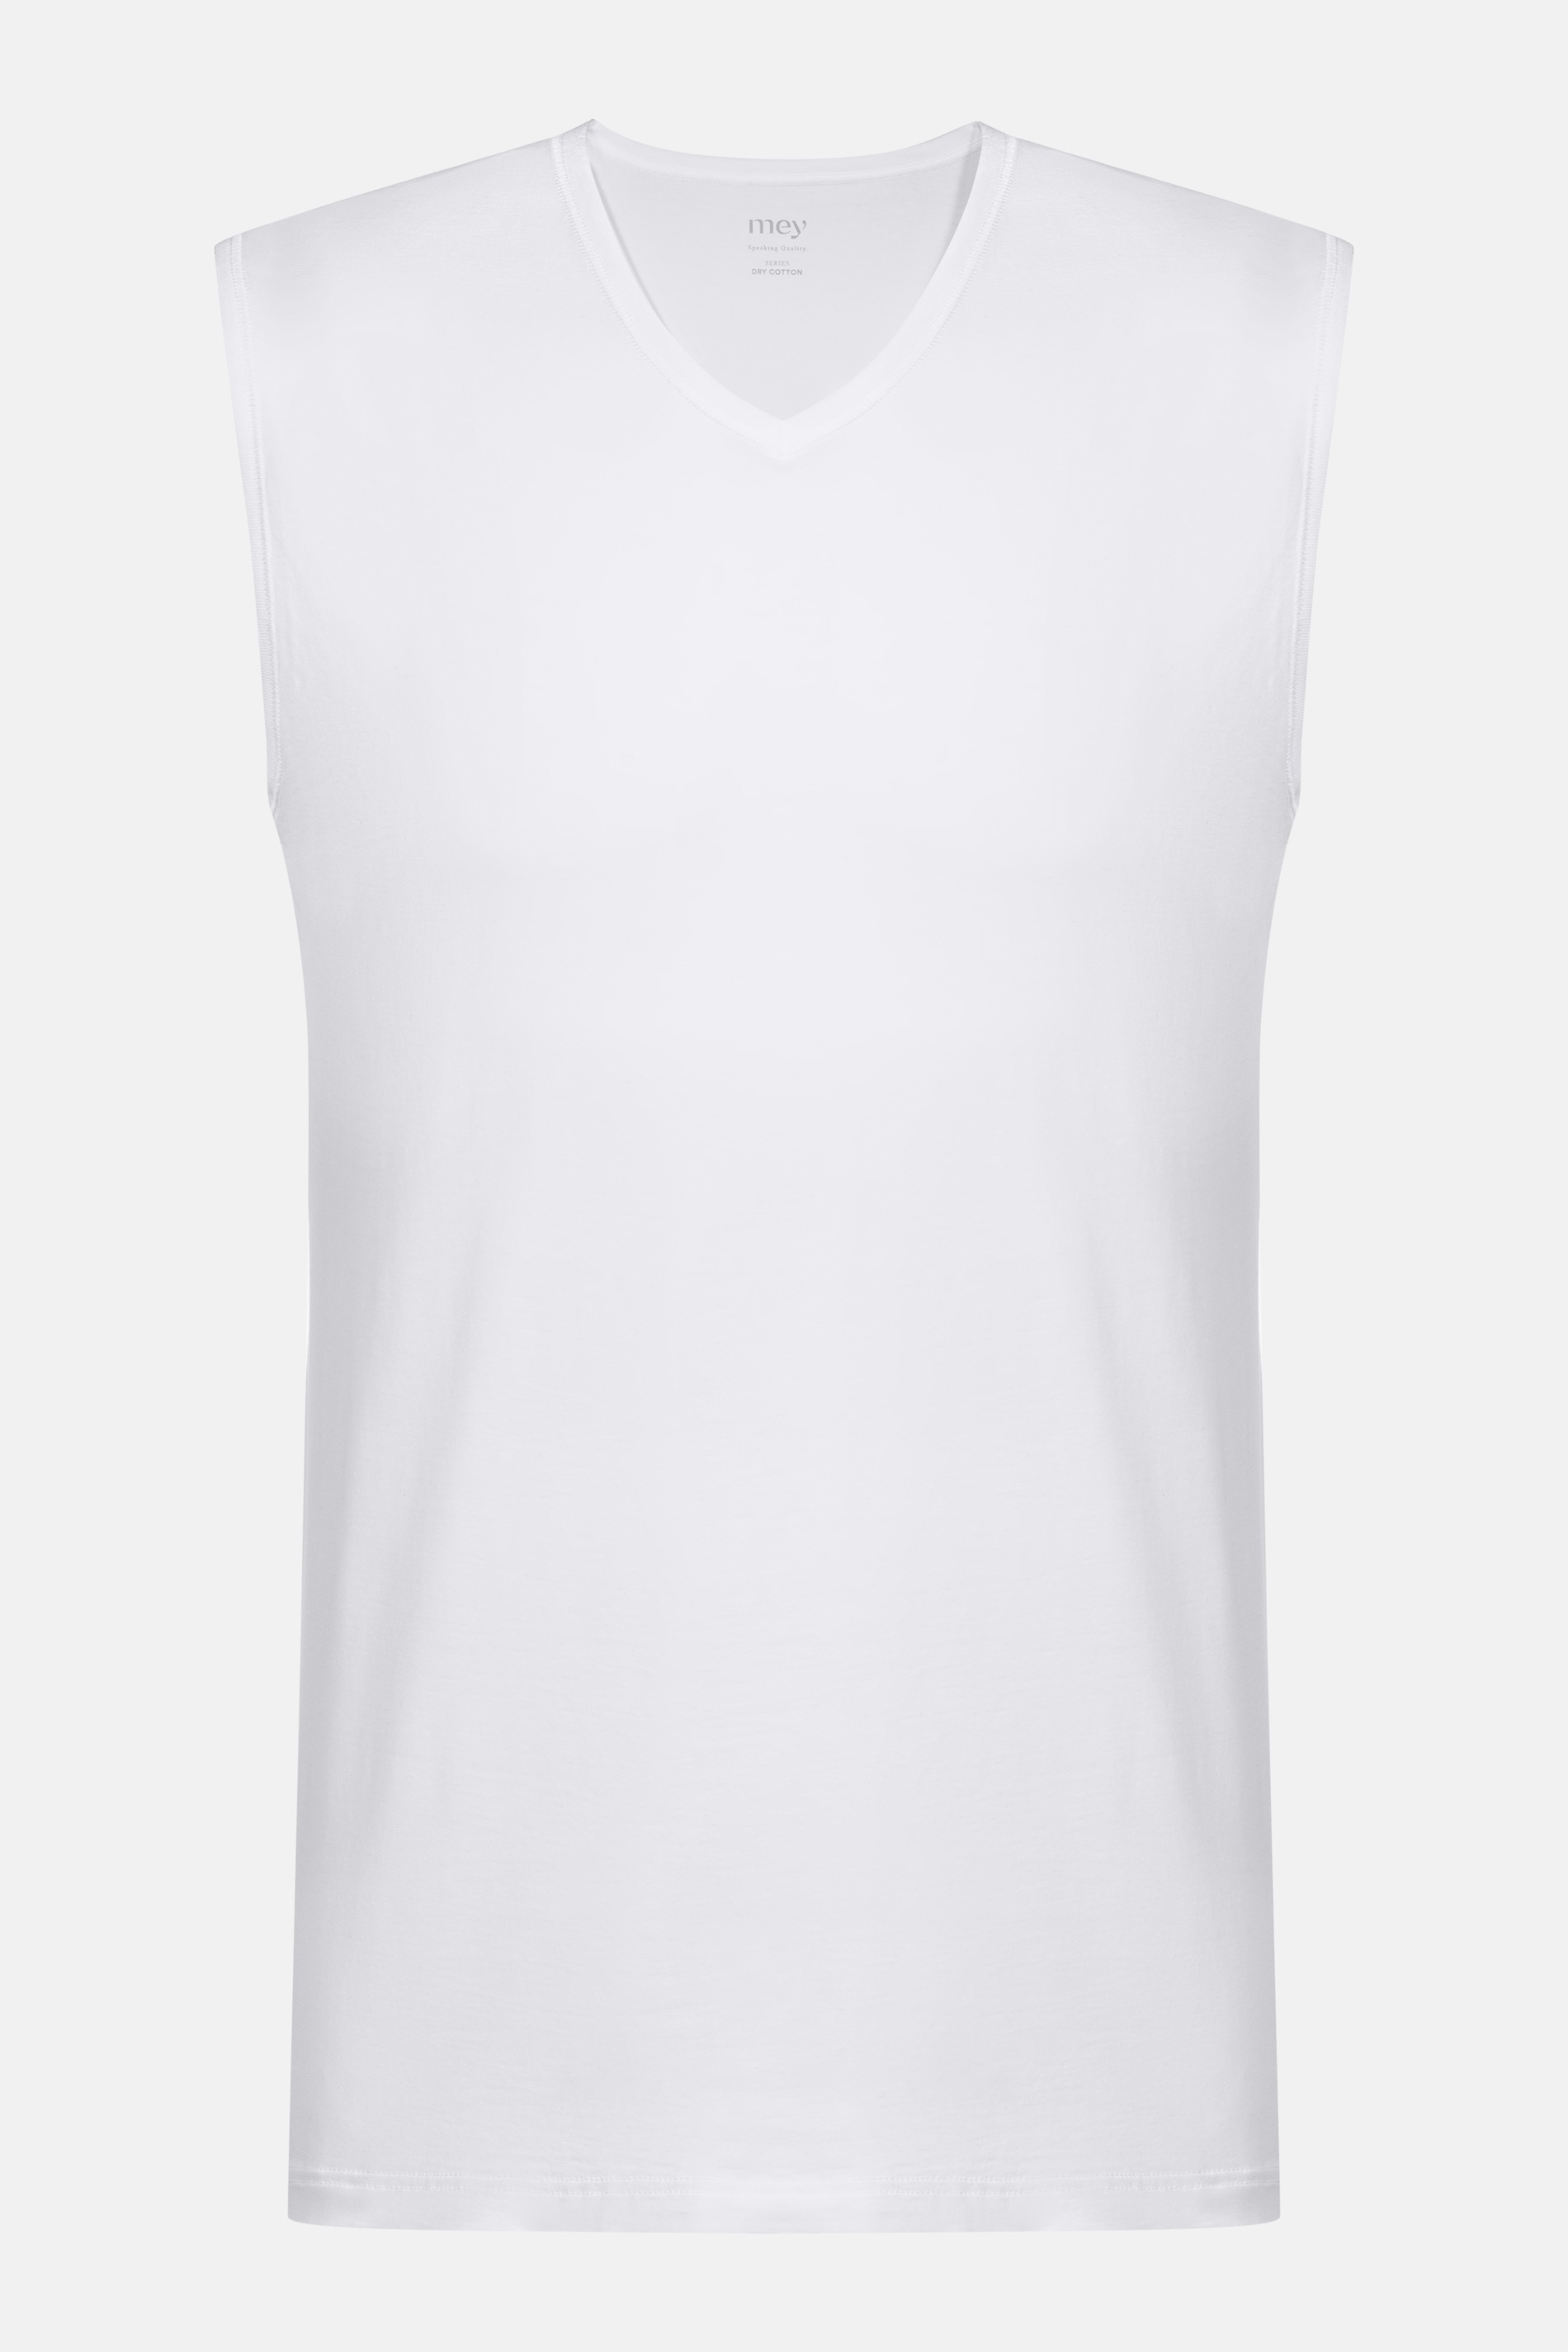 Muscle shirt White Serie Dry Cotton Cut Out | mey®